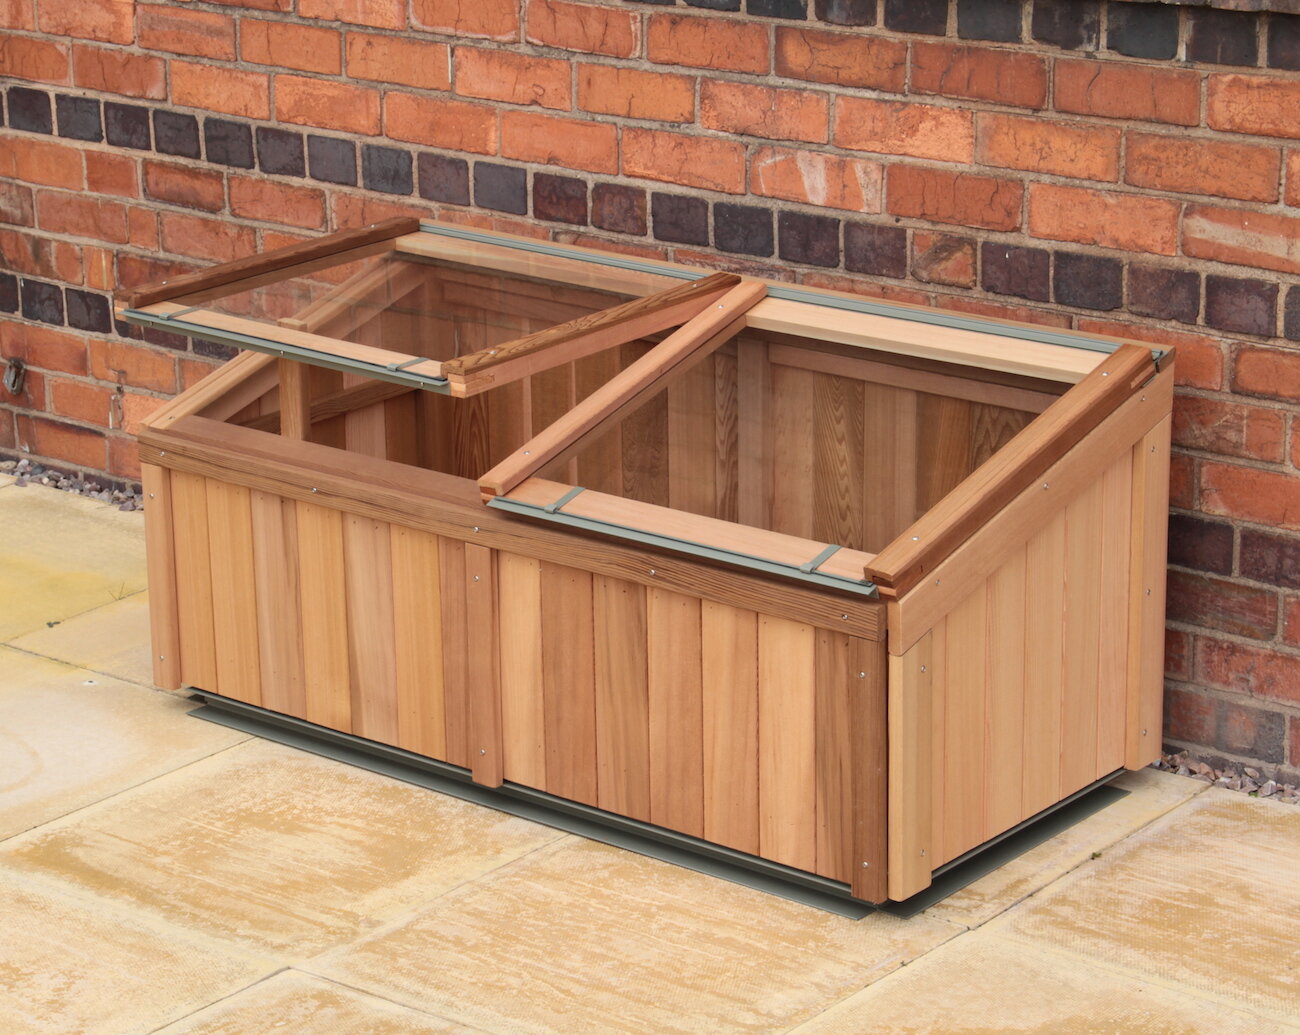 Cold frame with boarding kit